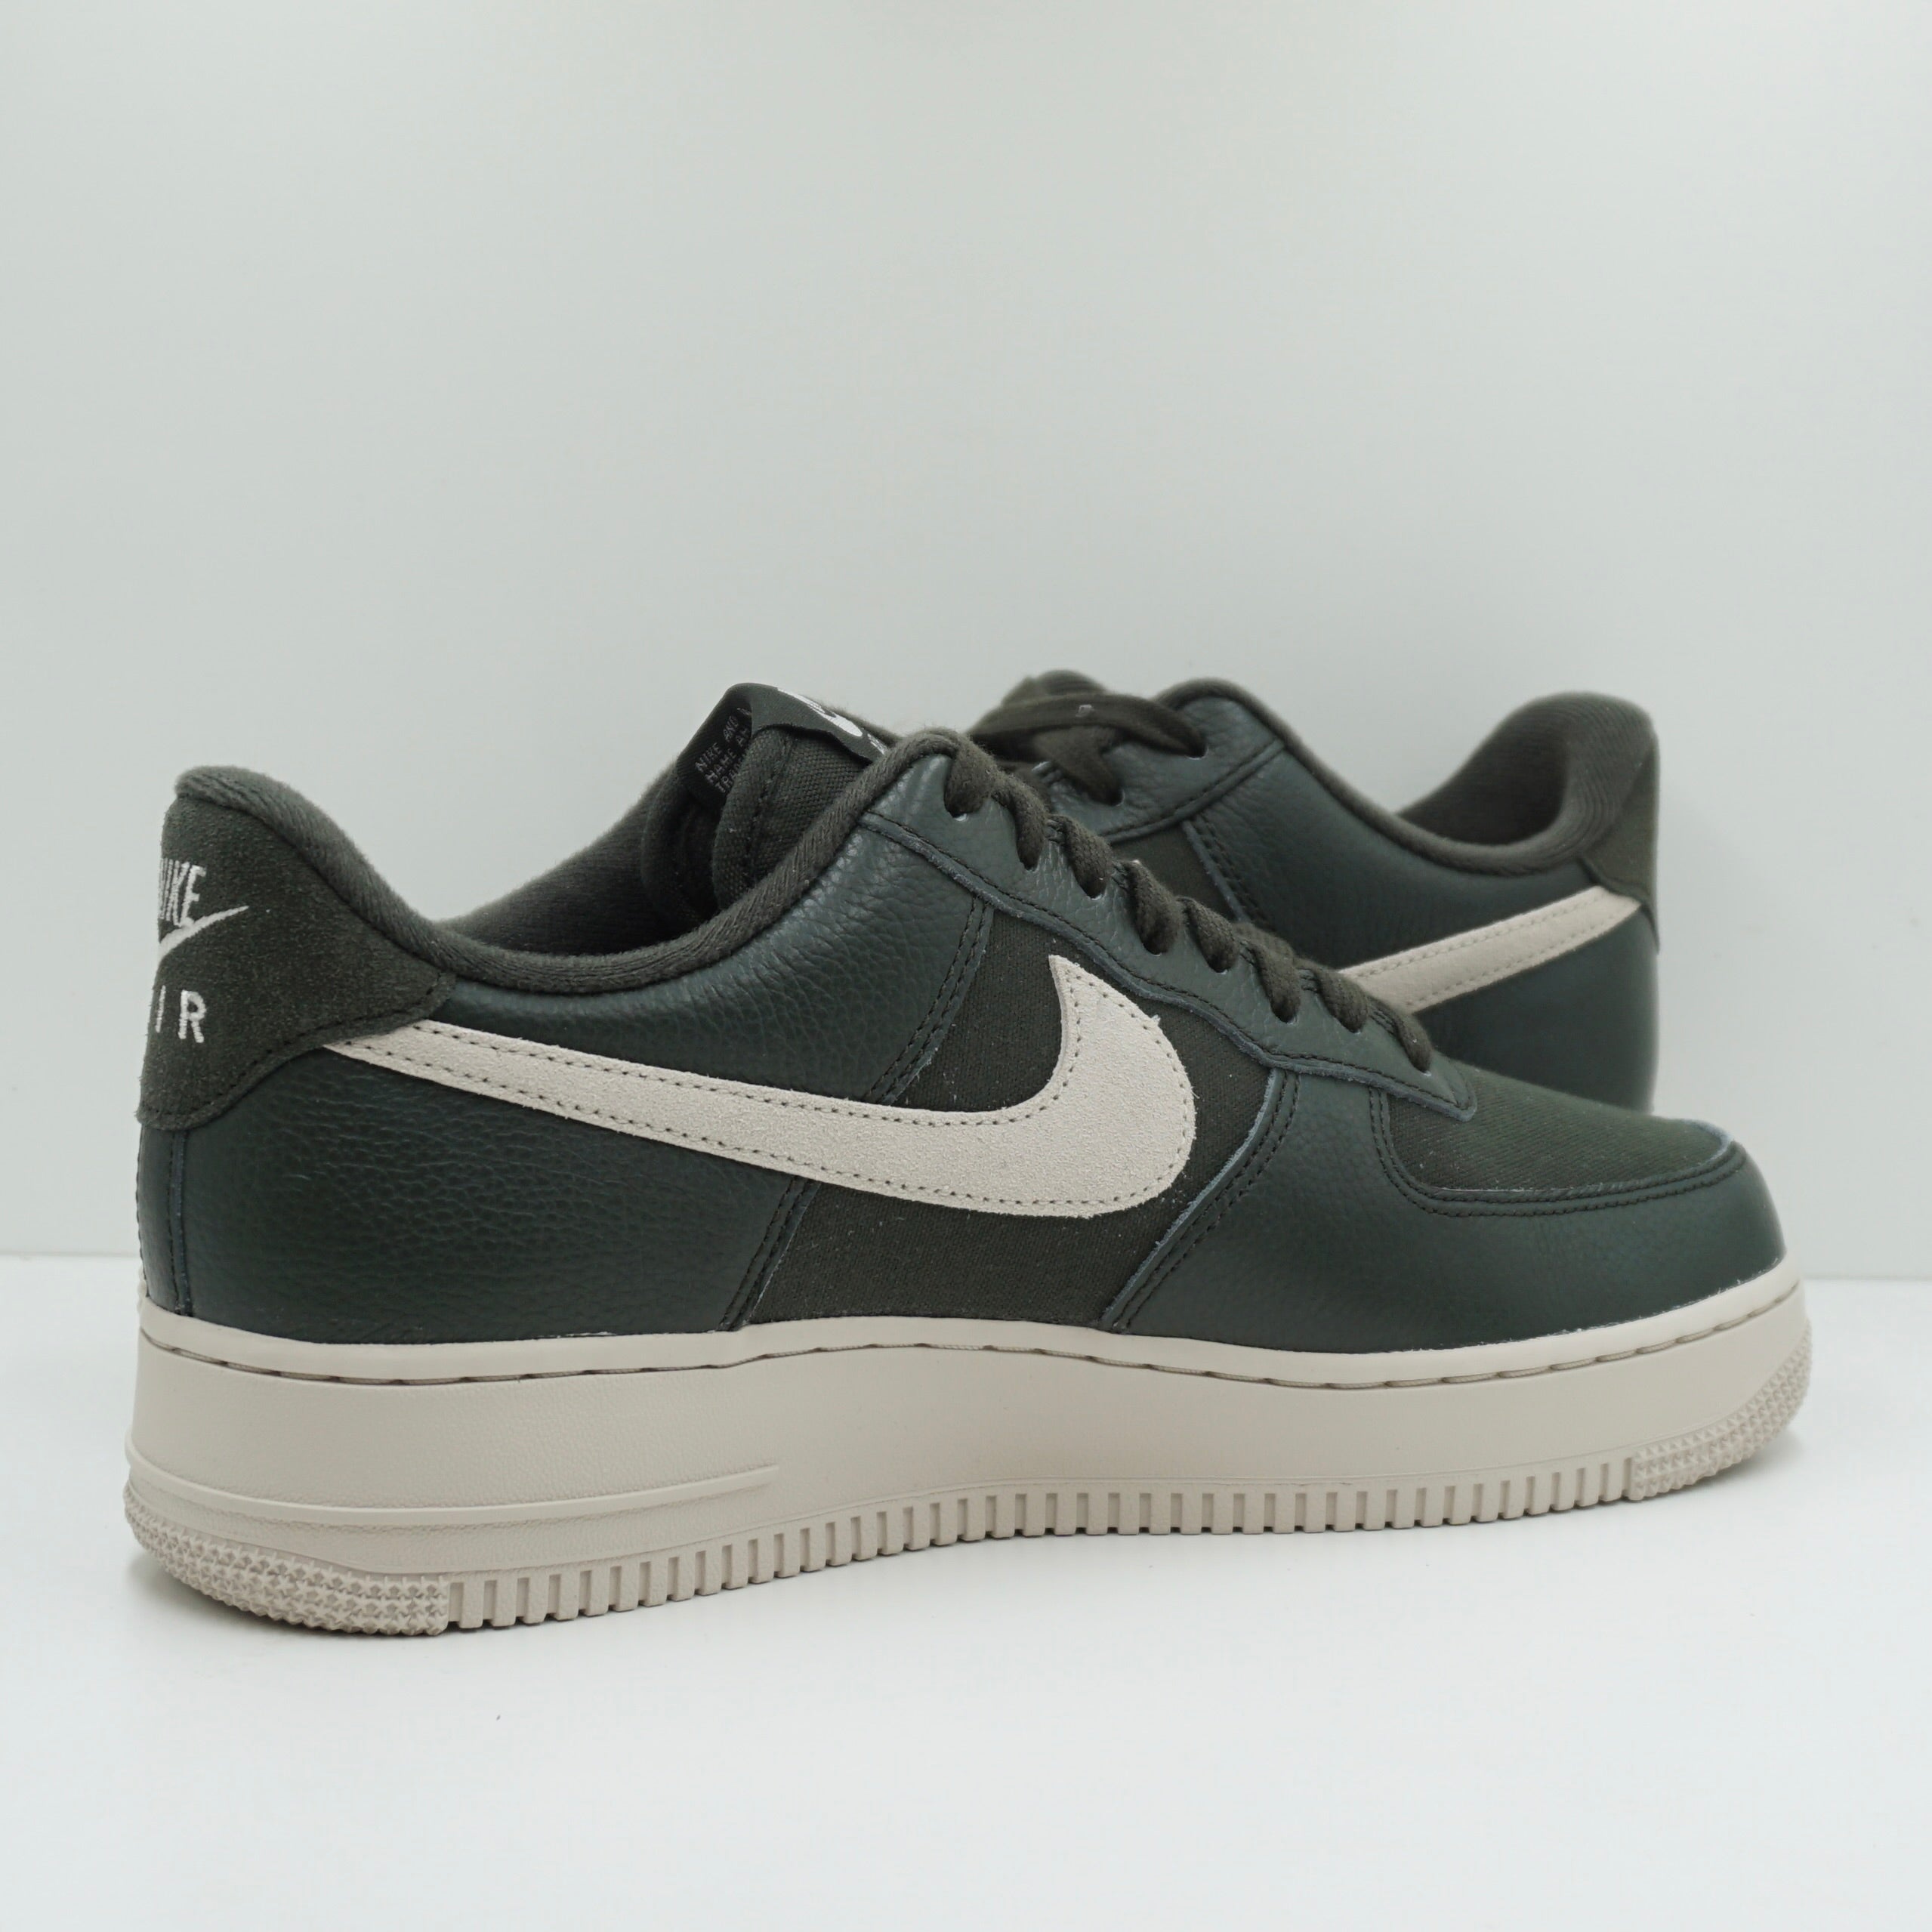 Nike Air Force 1 Low '07 Sequoia